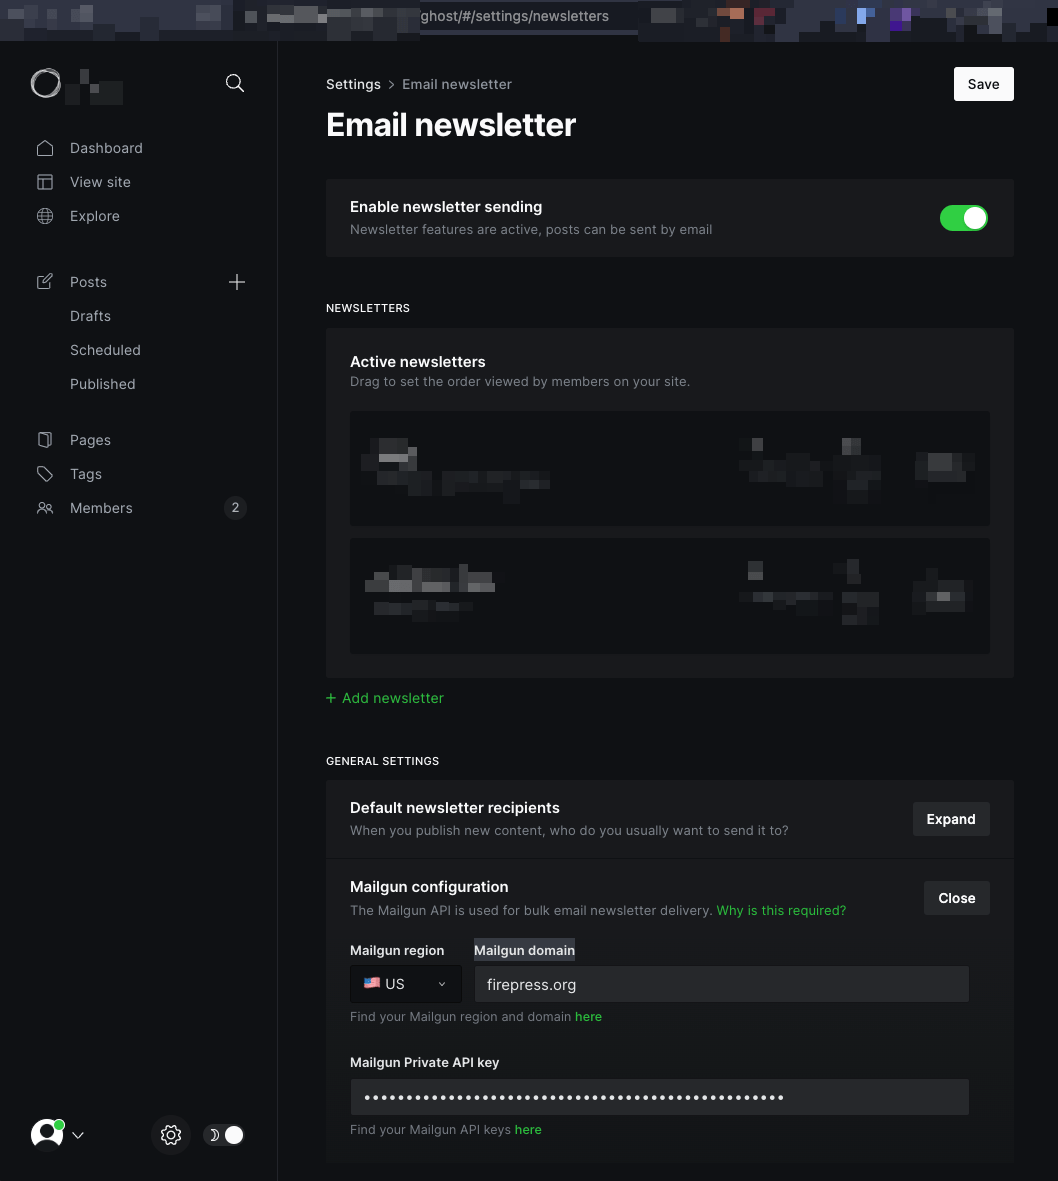 How to send to emails to your membership with Ghost?